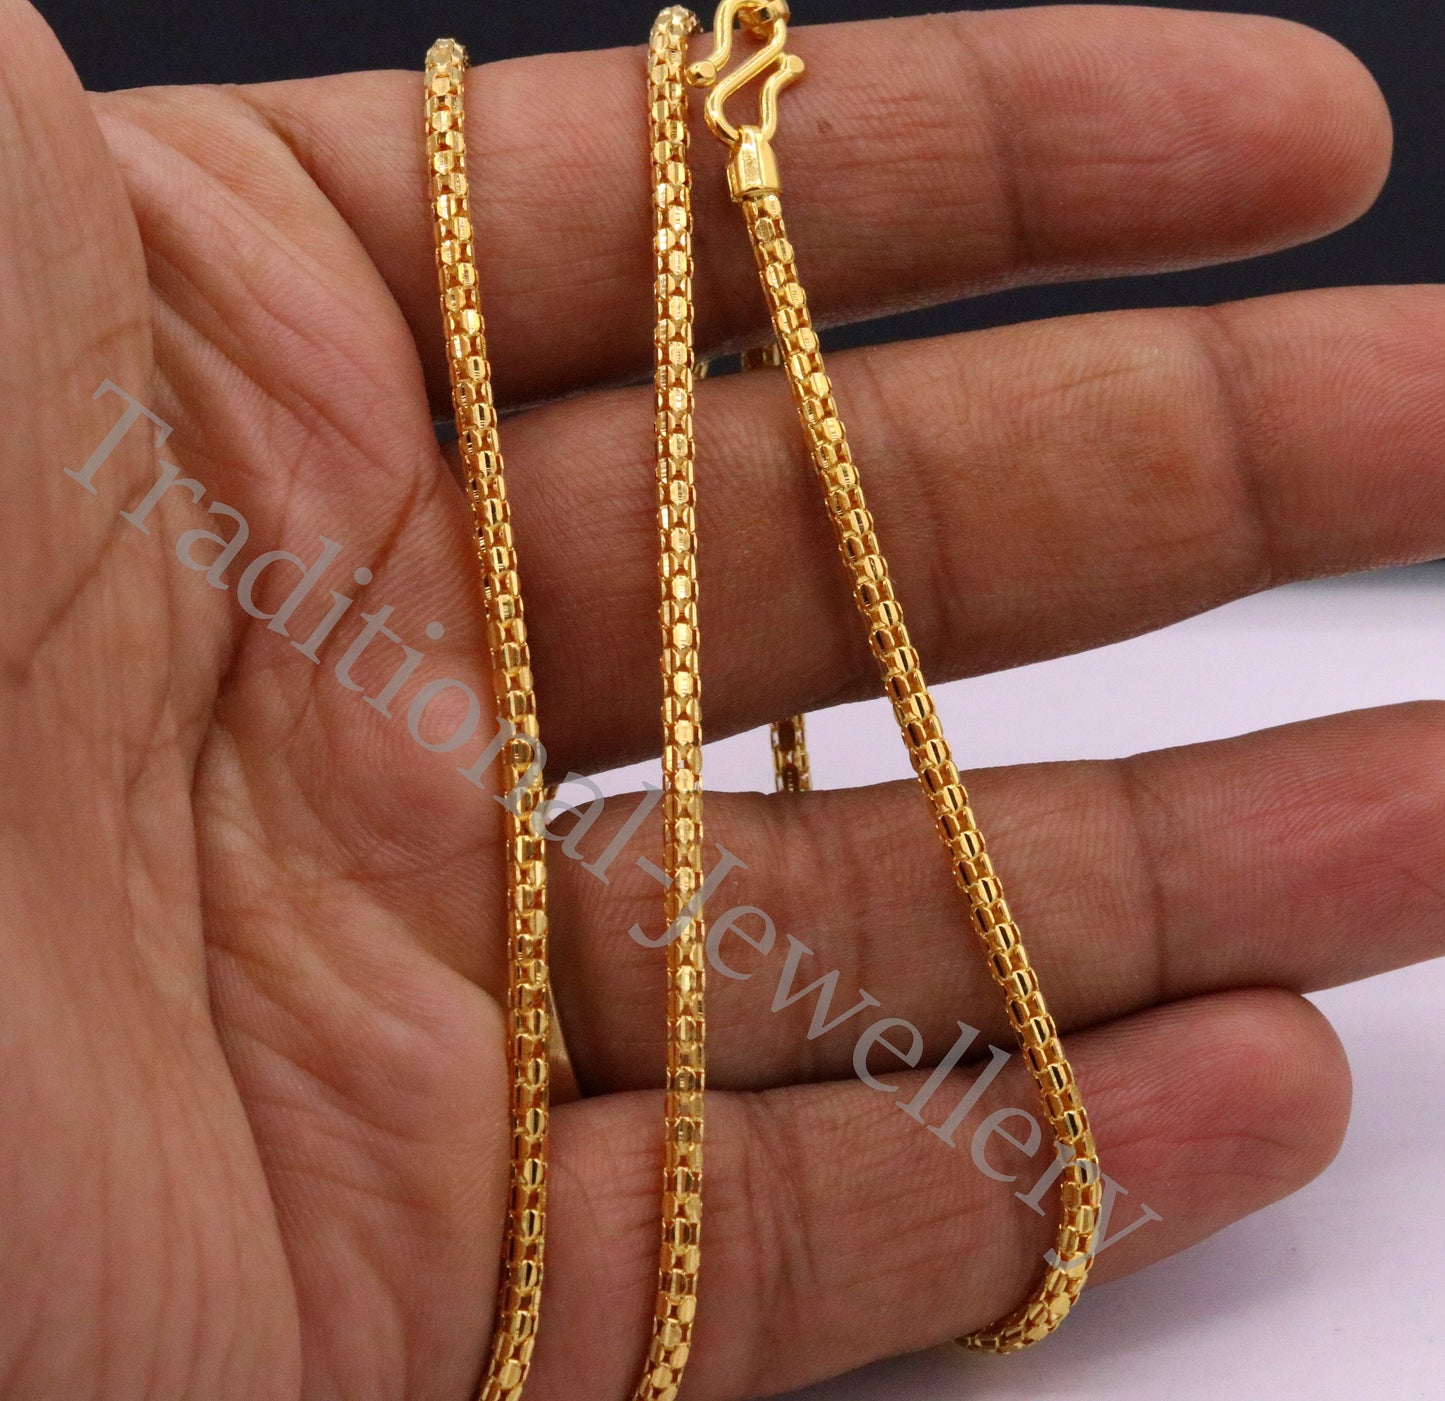 22kt yellow gold handmade unique design chain 20 inches unisex chain necklace from Rajasthan India. - TRIBAL ORNAMENTS